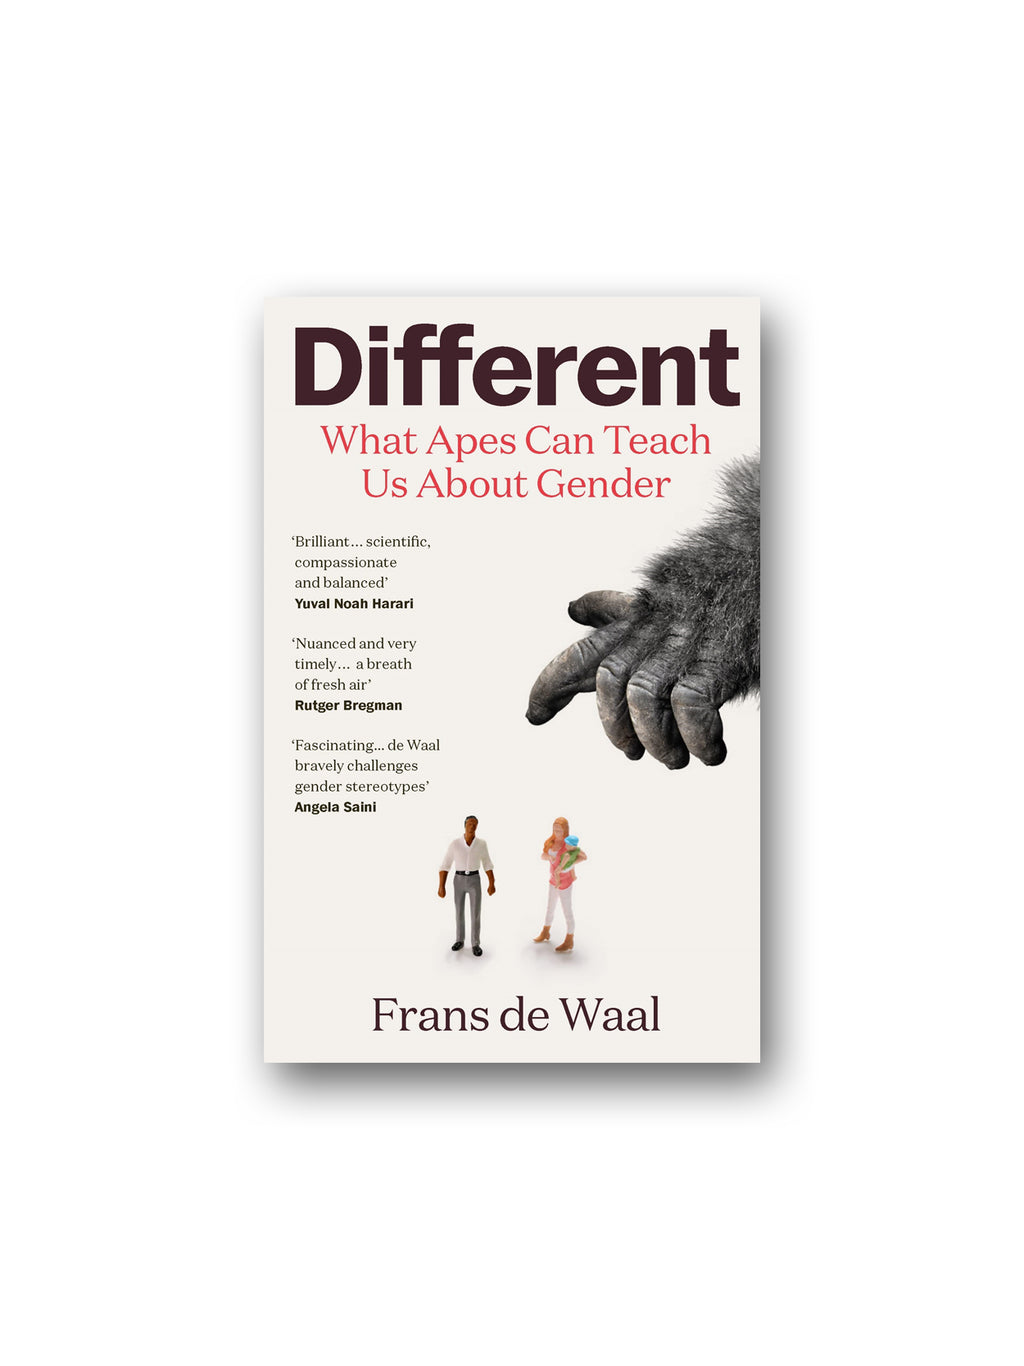 Different : What Apes Can Teach Us About Gender